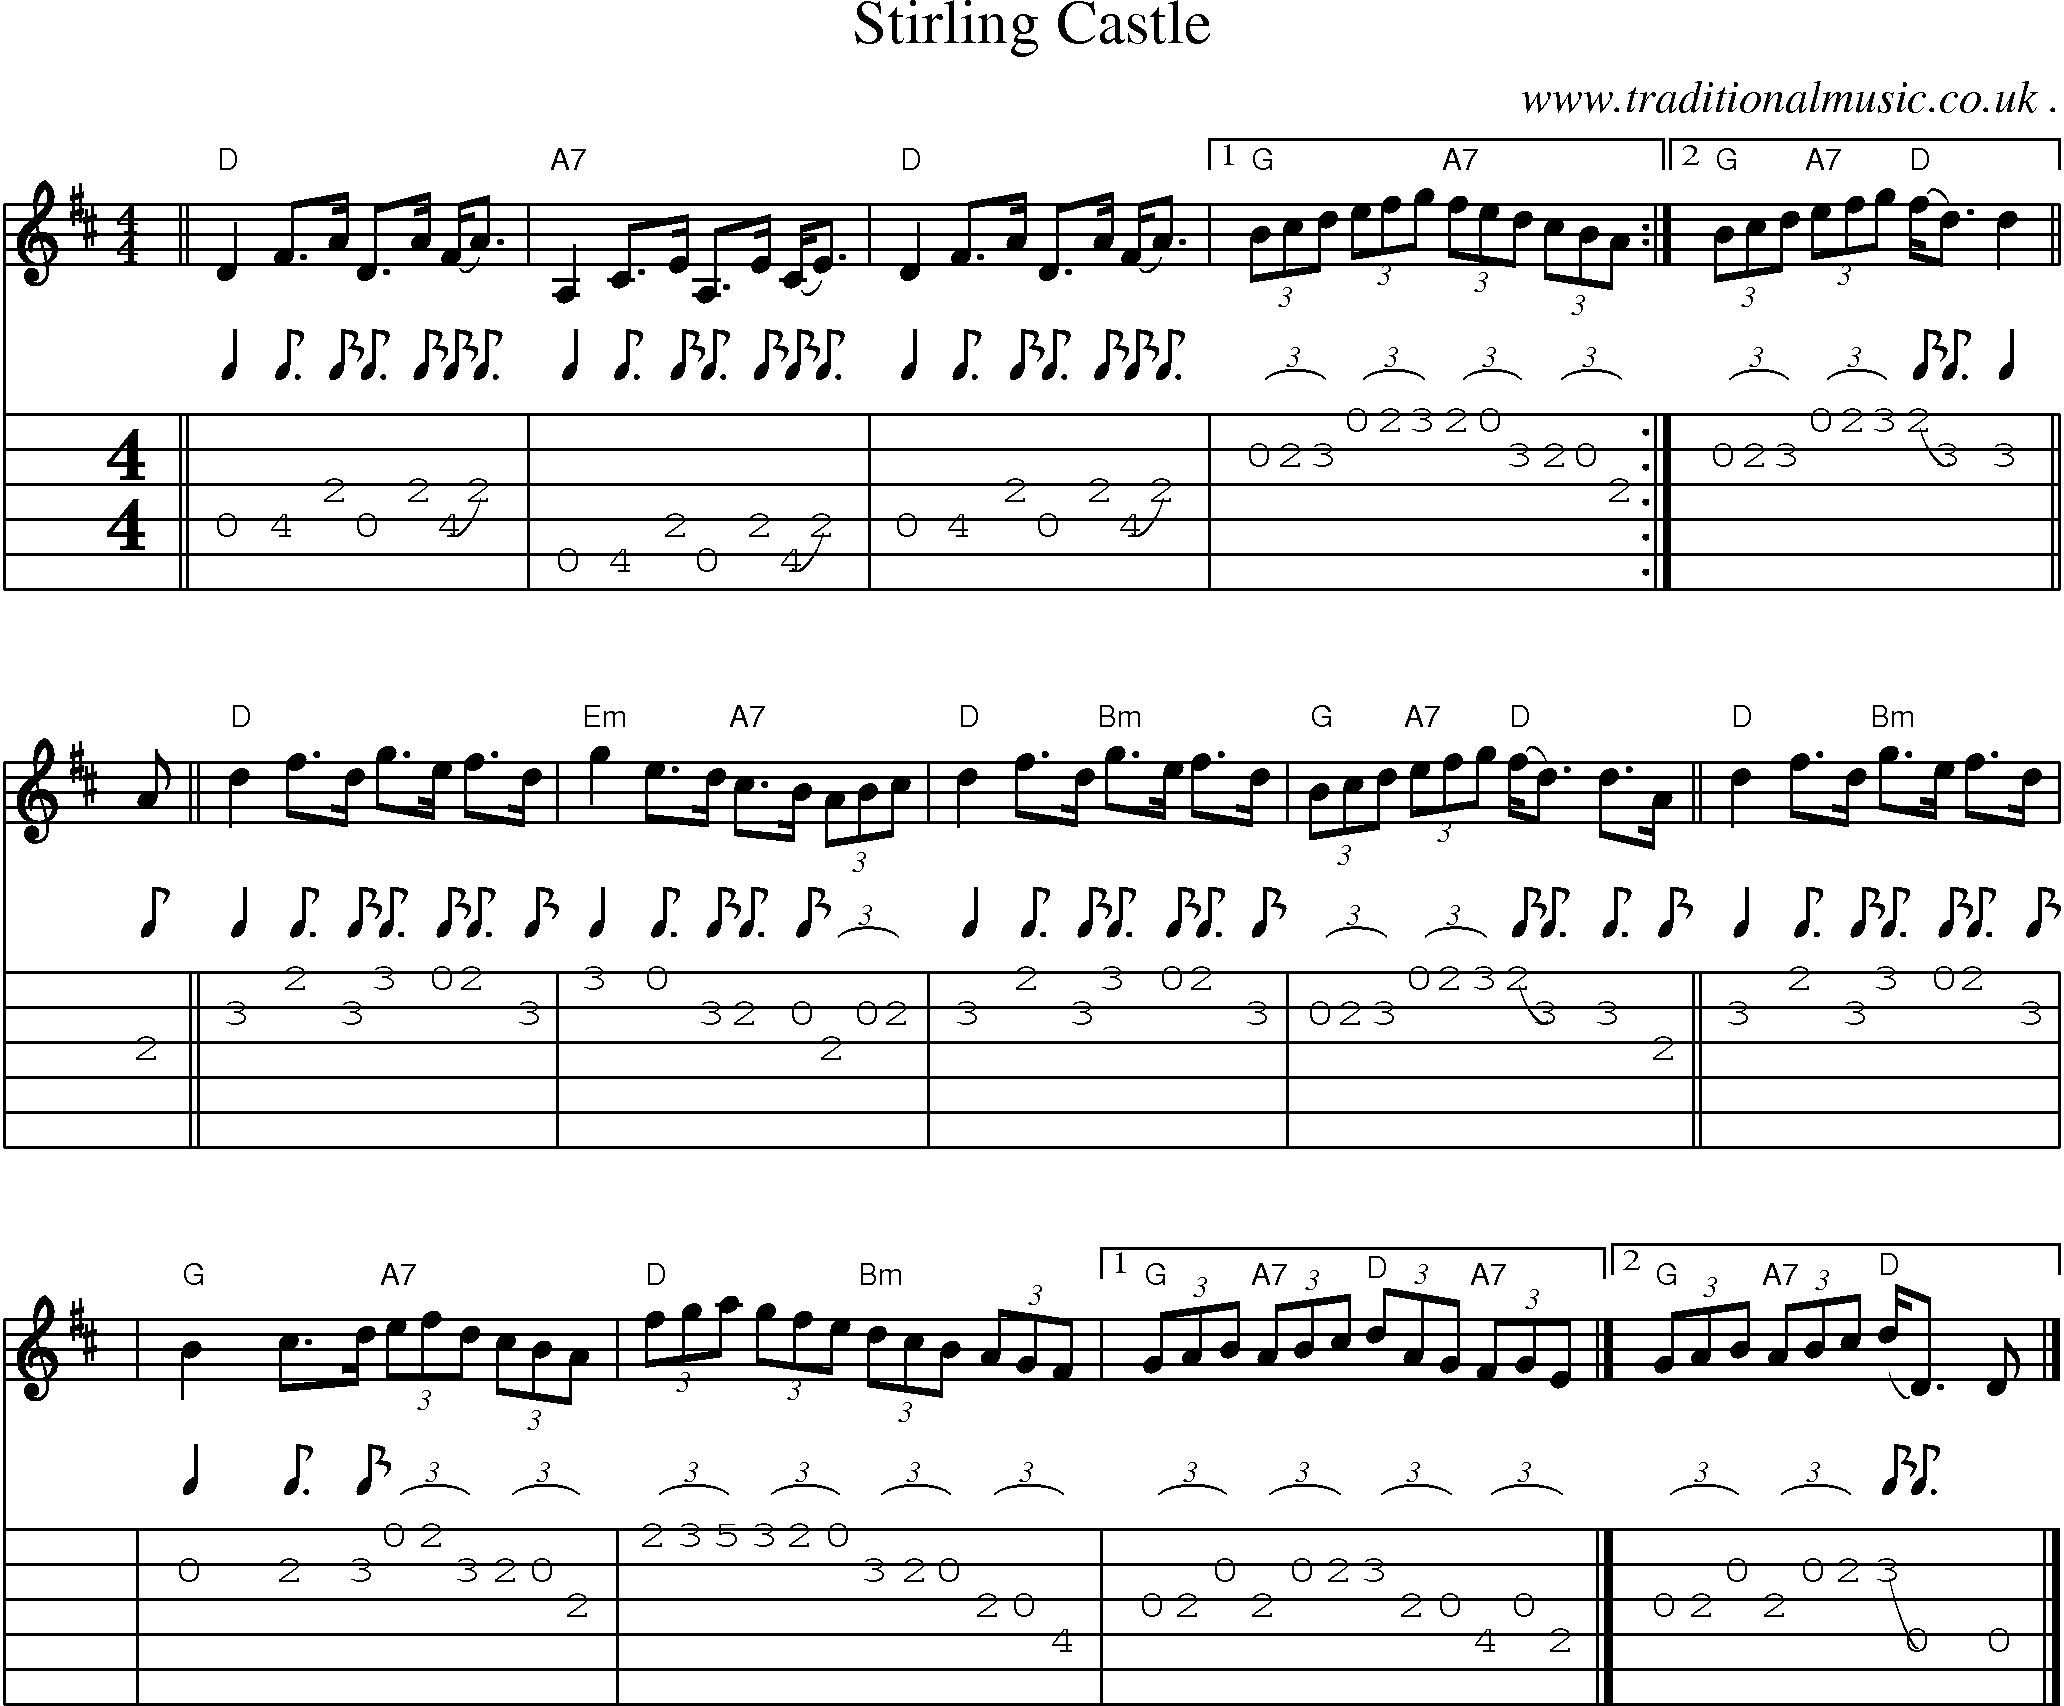 Sheet-music  score, Chords and Guitar Tabs for Stirling Castle